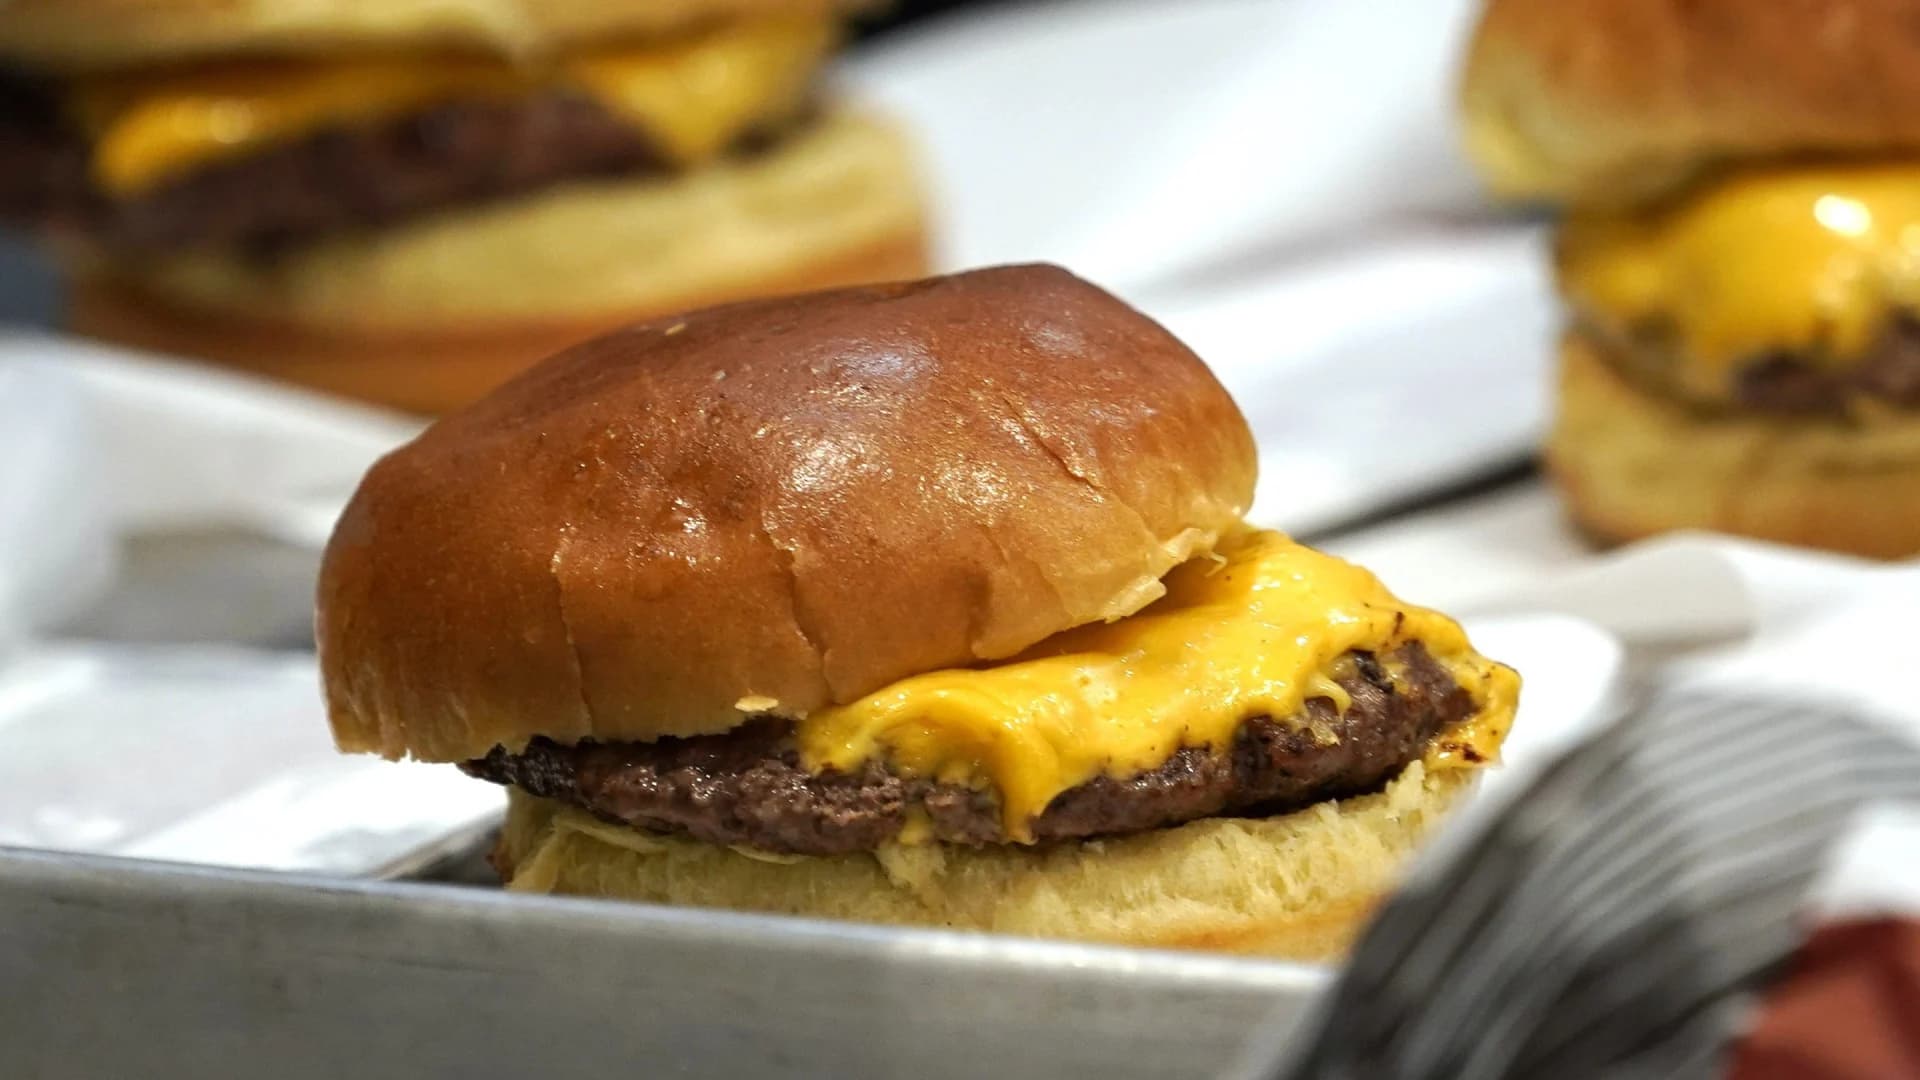 Score some delicious deals on National Cheeseburger Day